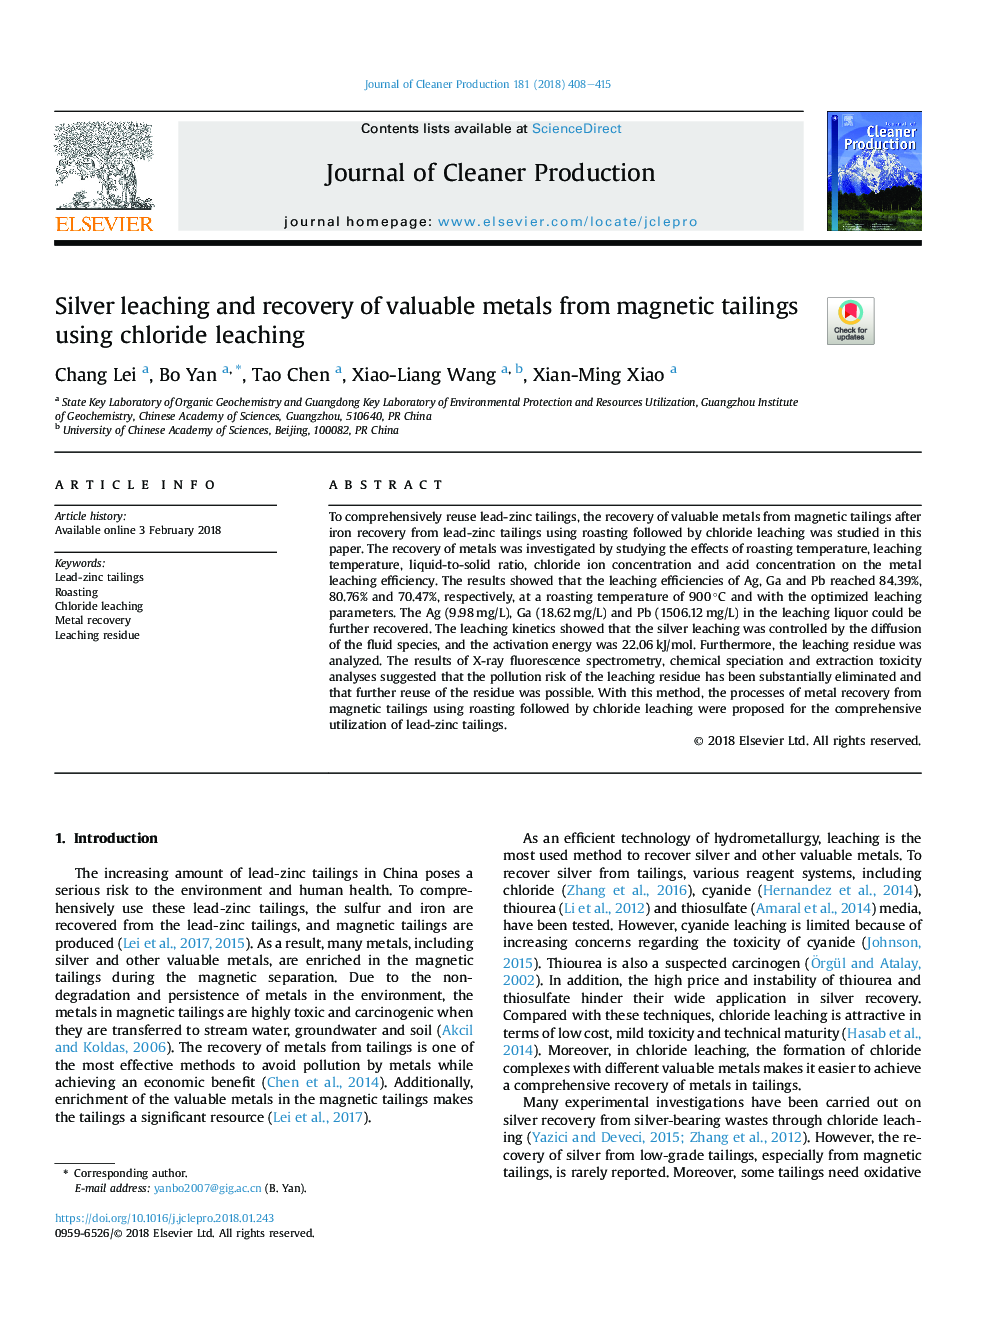 Silver leaching and recovery of valuable metals from magnetic tailings using chloride leaching